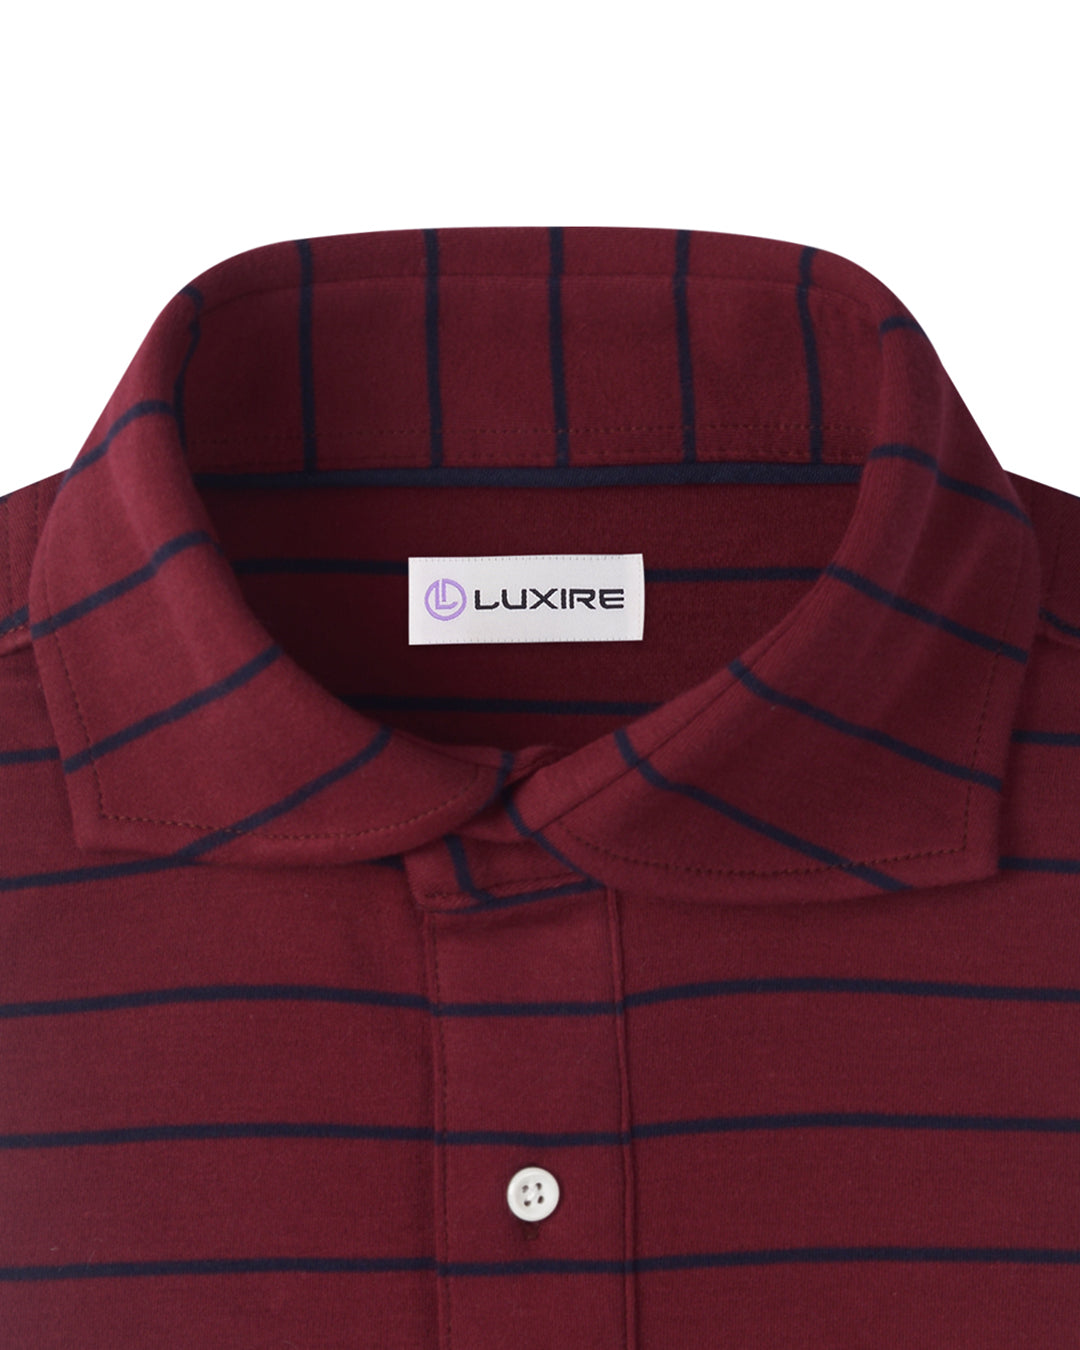 Collar of the custom oxford polo shirt for men by Luxire in maroon with navy stripes